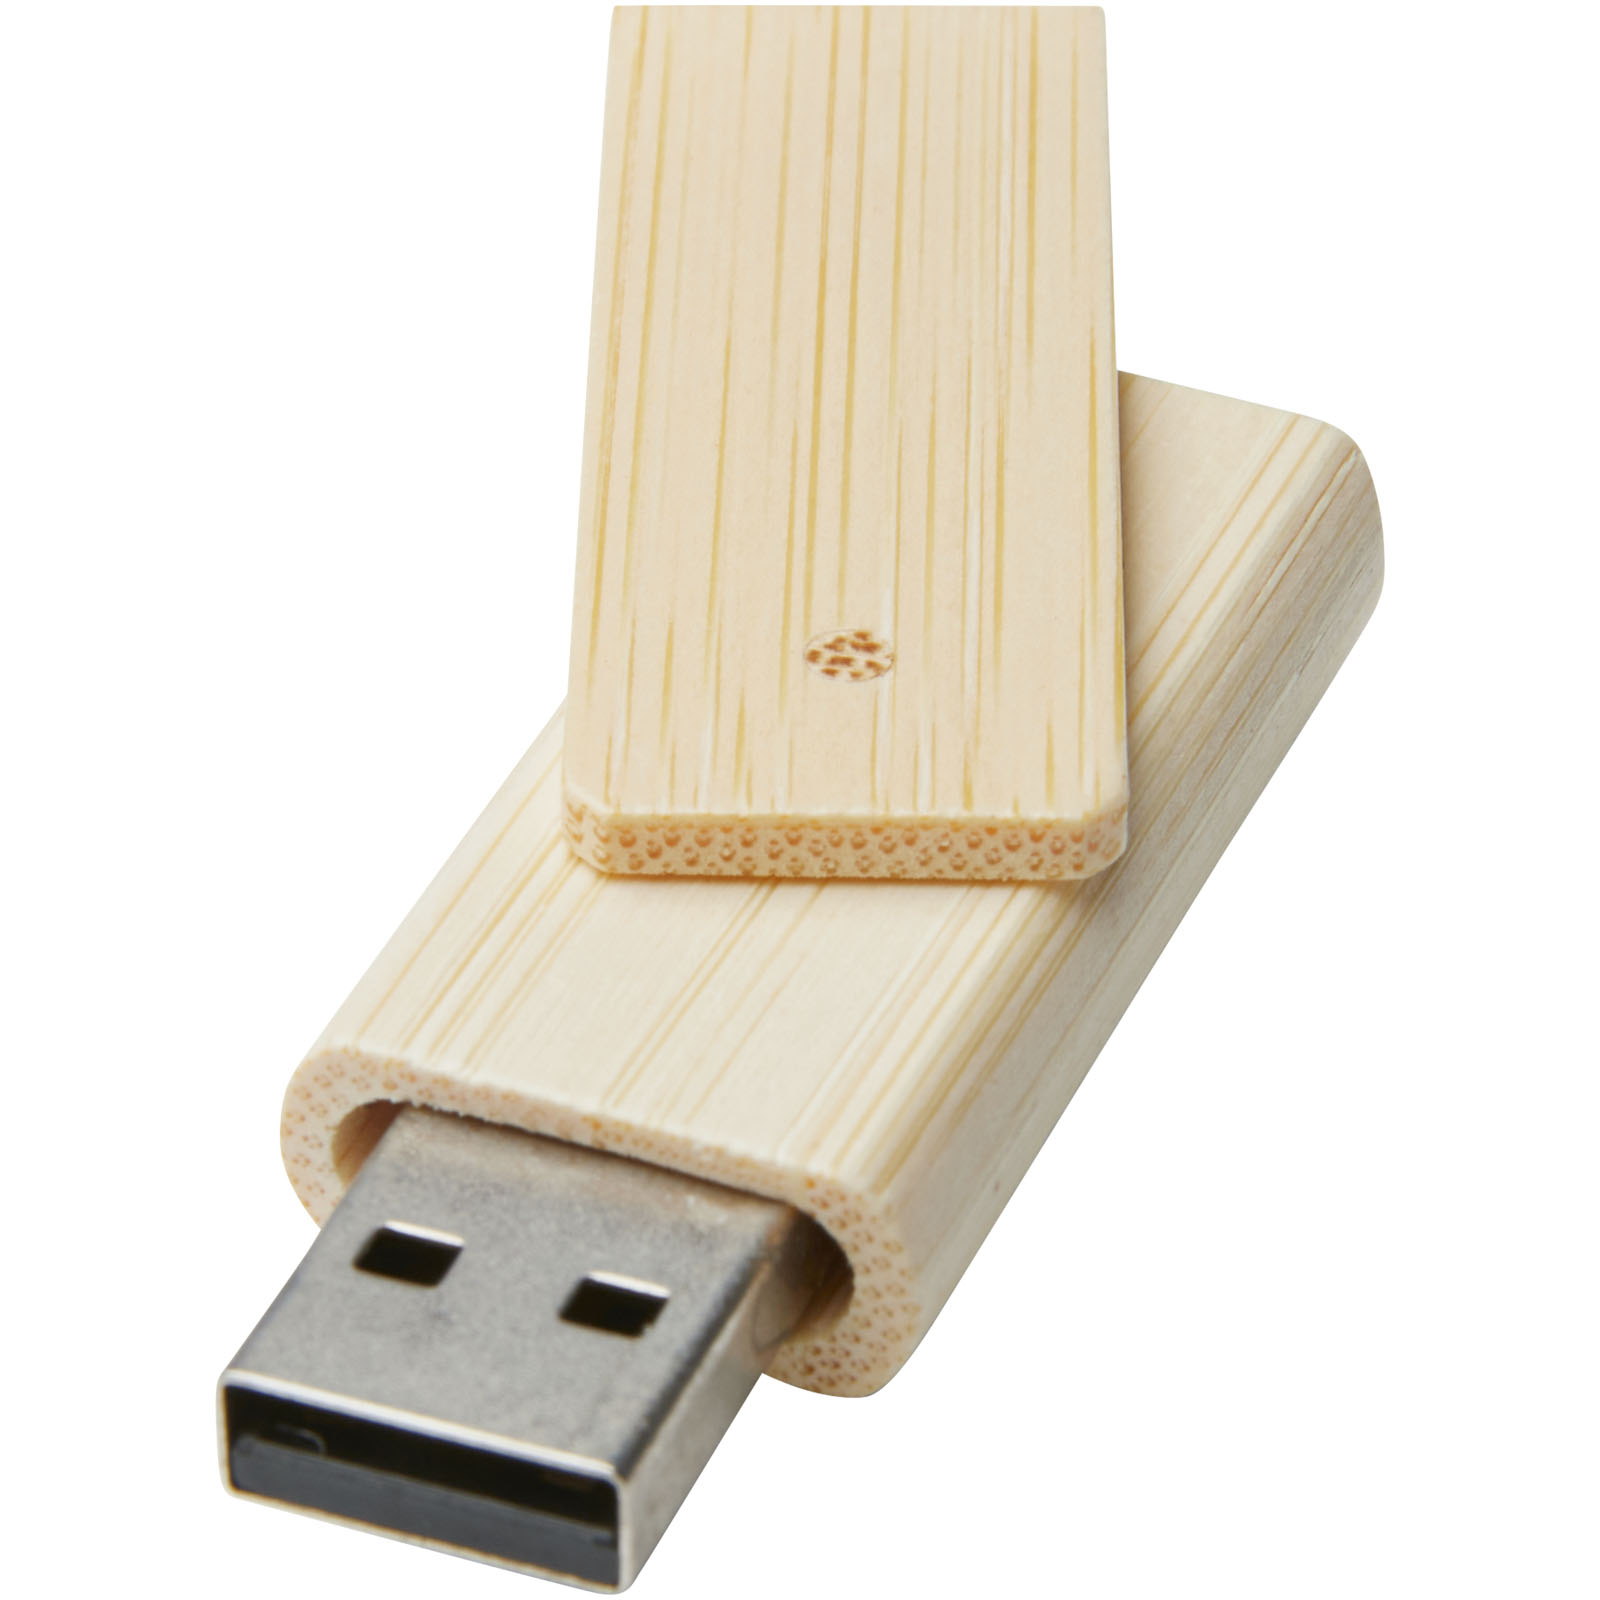 BambooRotate USB 2.0 Pendrive - 16GB - Rolvenden - Enciso